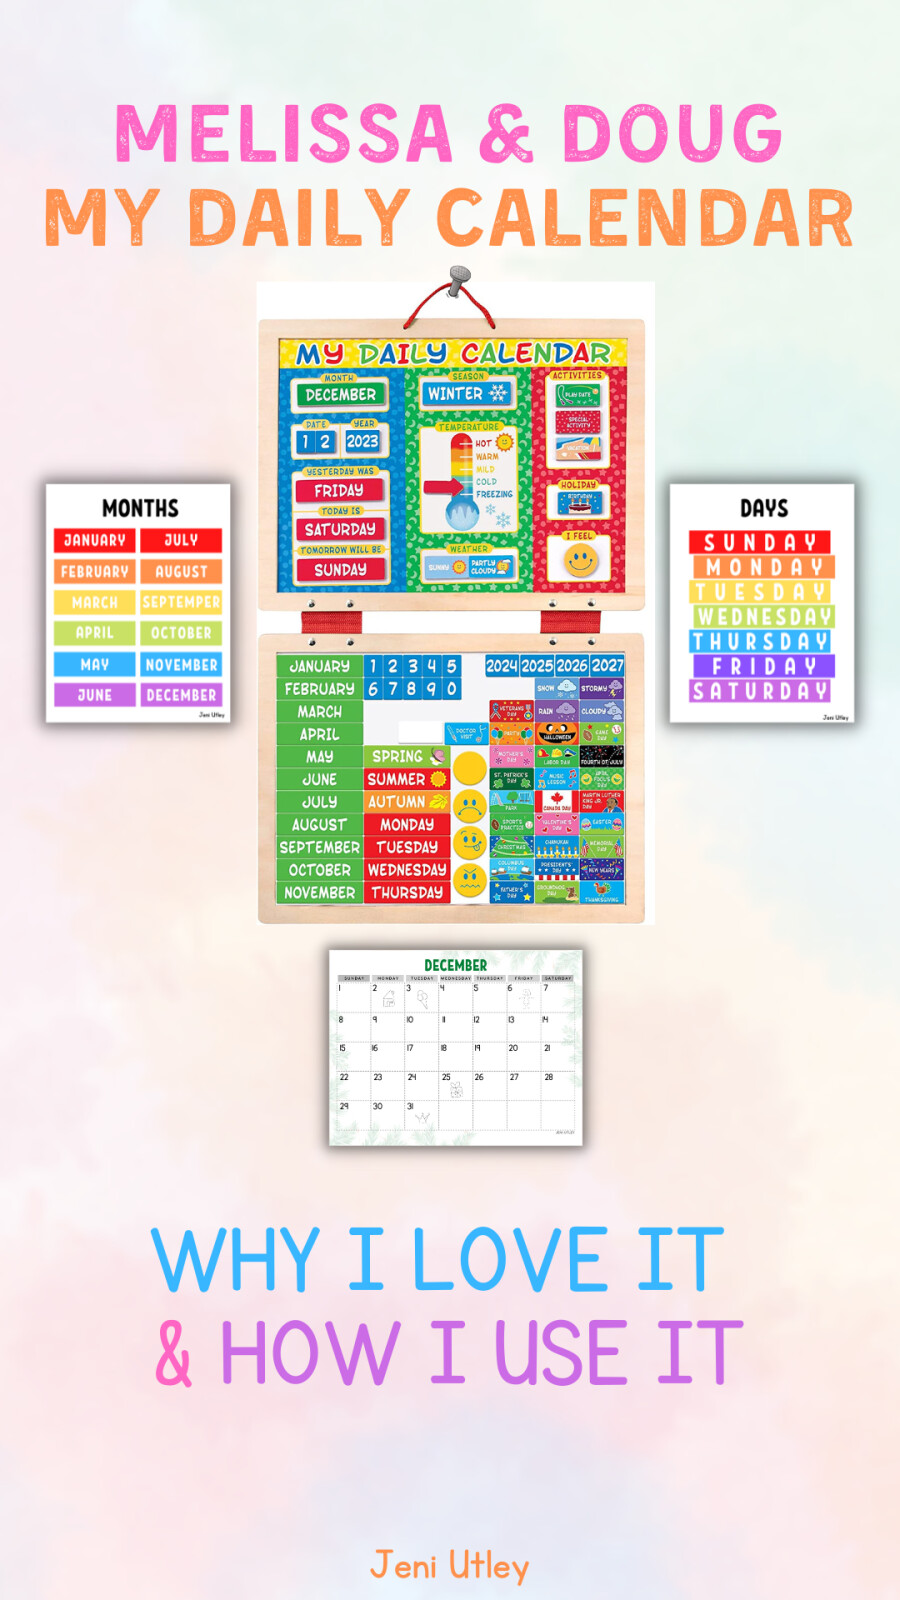 Melissa and Doug – My Daily Calendar – Product Review - Why I love it and how I use it.